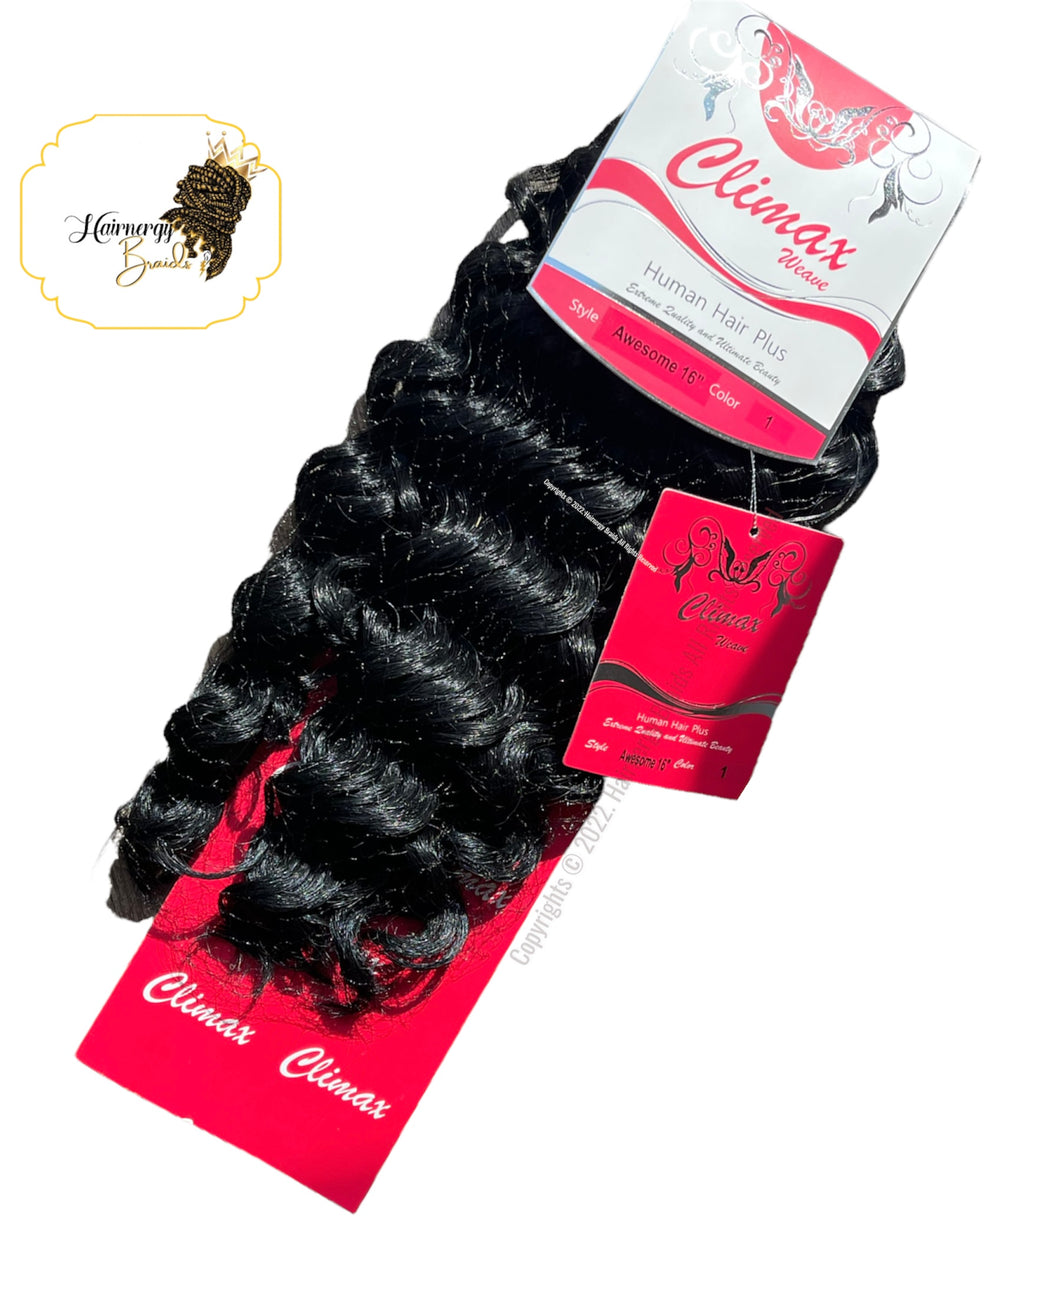 CLIMAX Human Hair Plus - AWESOME 16